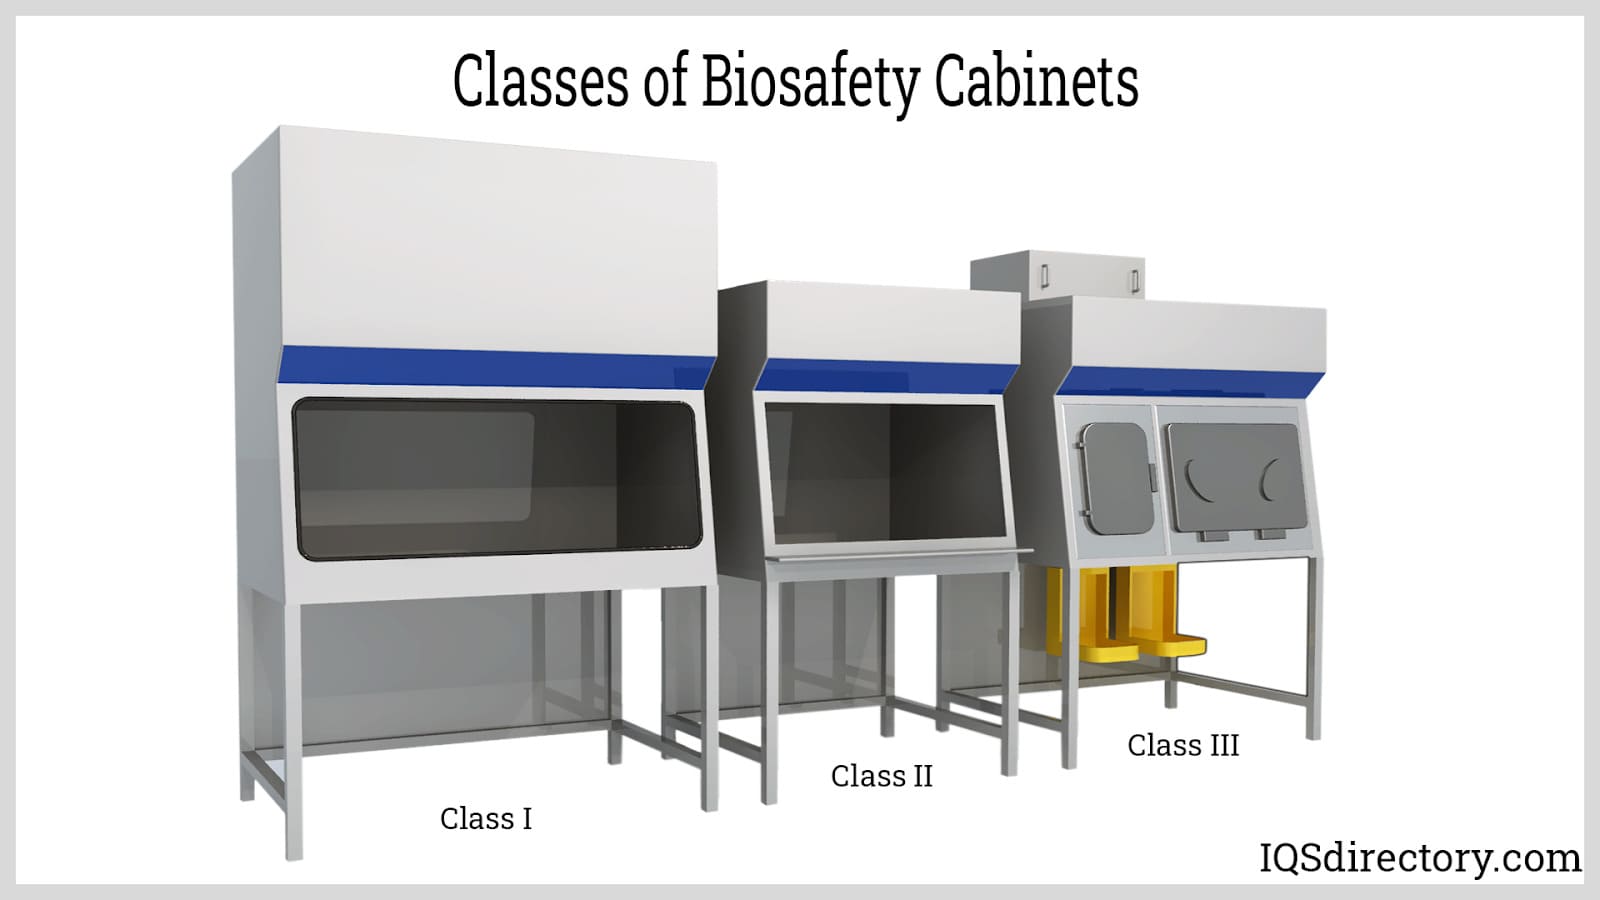 Classes of Biosafety Cabinets